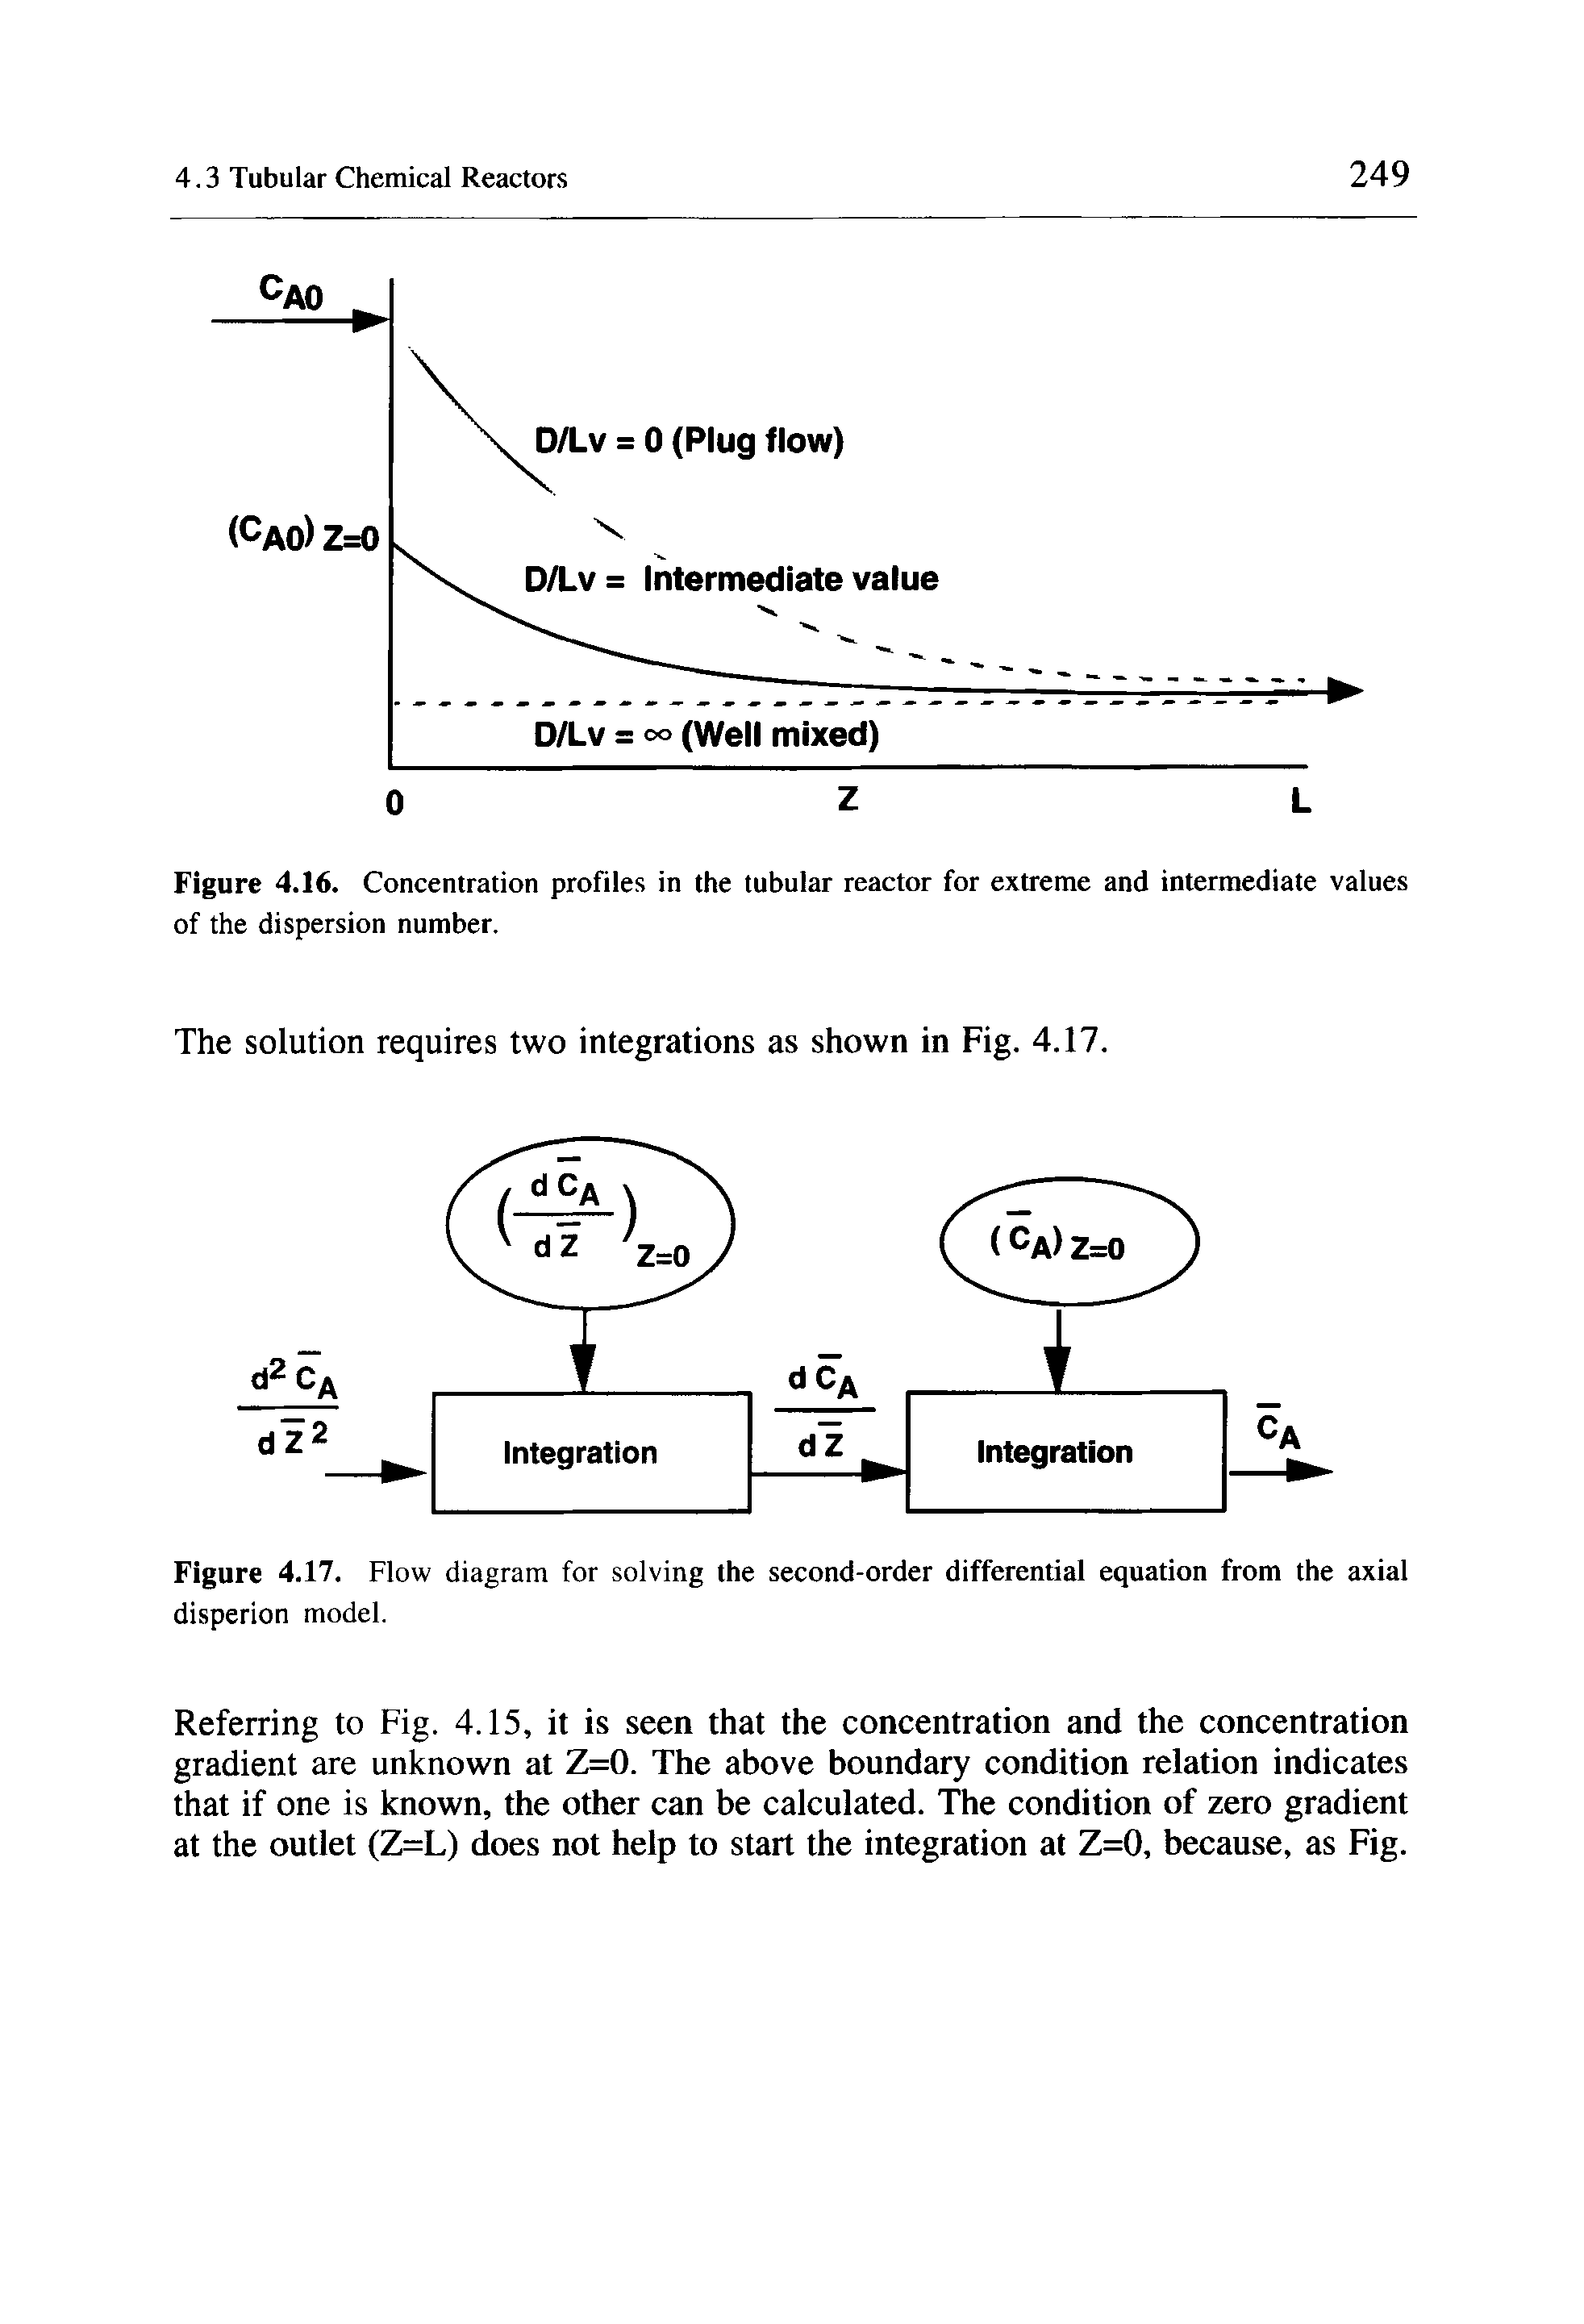 Figure 4.17. Flow diagram for solving the second-order differential equation from the axial disperion model.